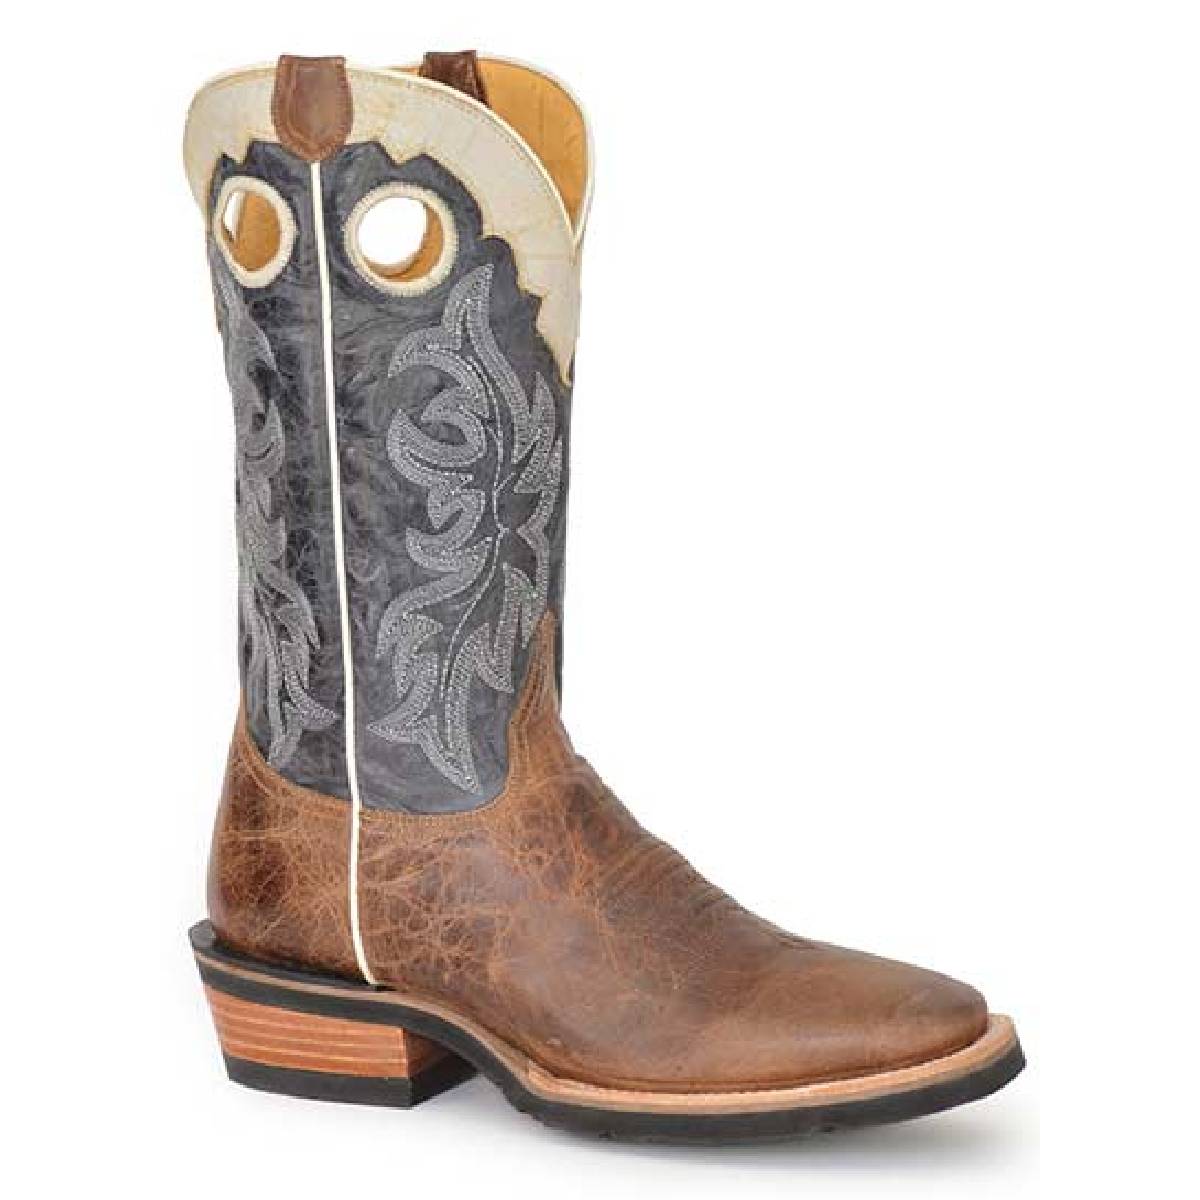 Men's Roper Ride 'Em Cowboy Leather GEO Sole Boots Handcrafted Tan - yeehawcowboy